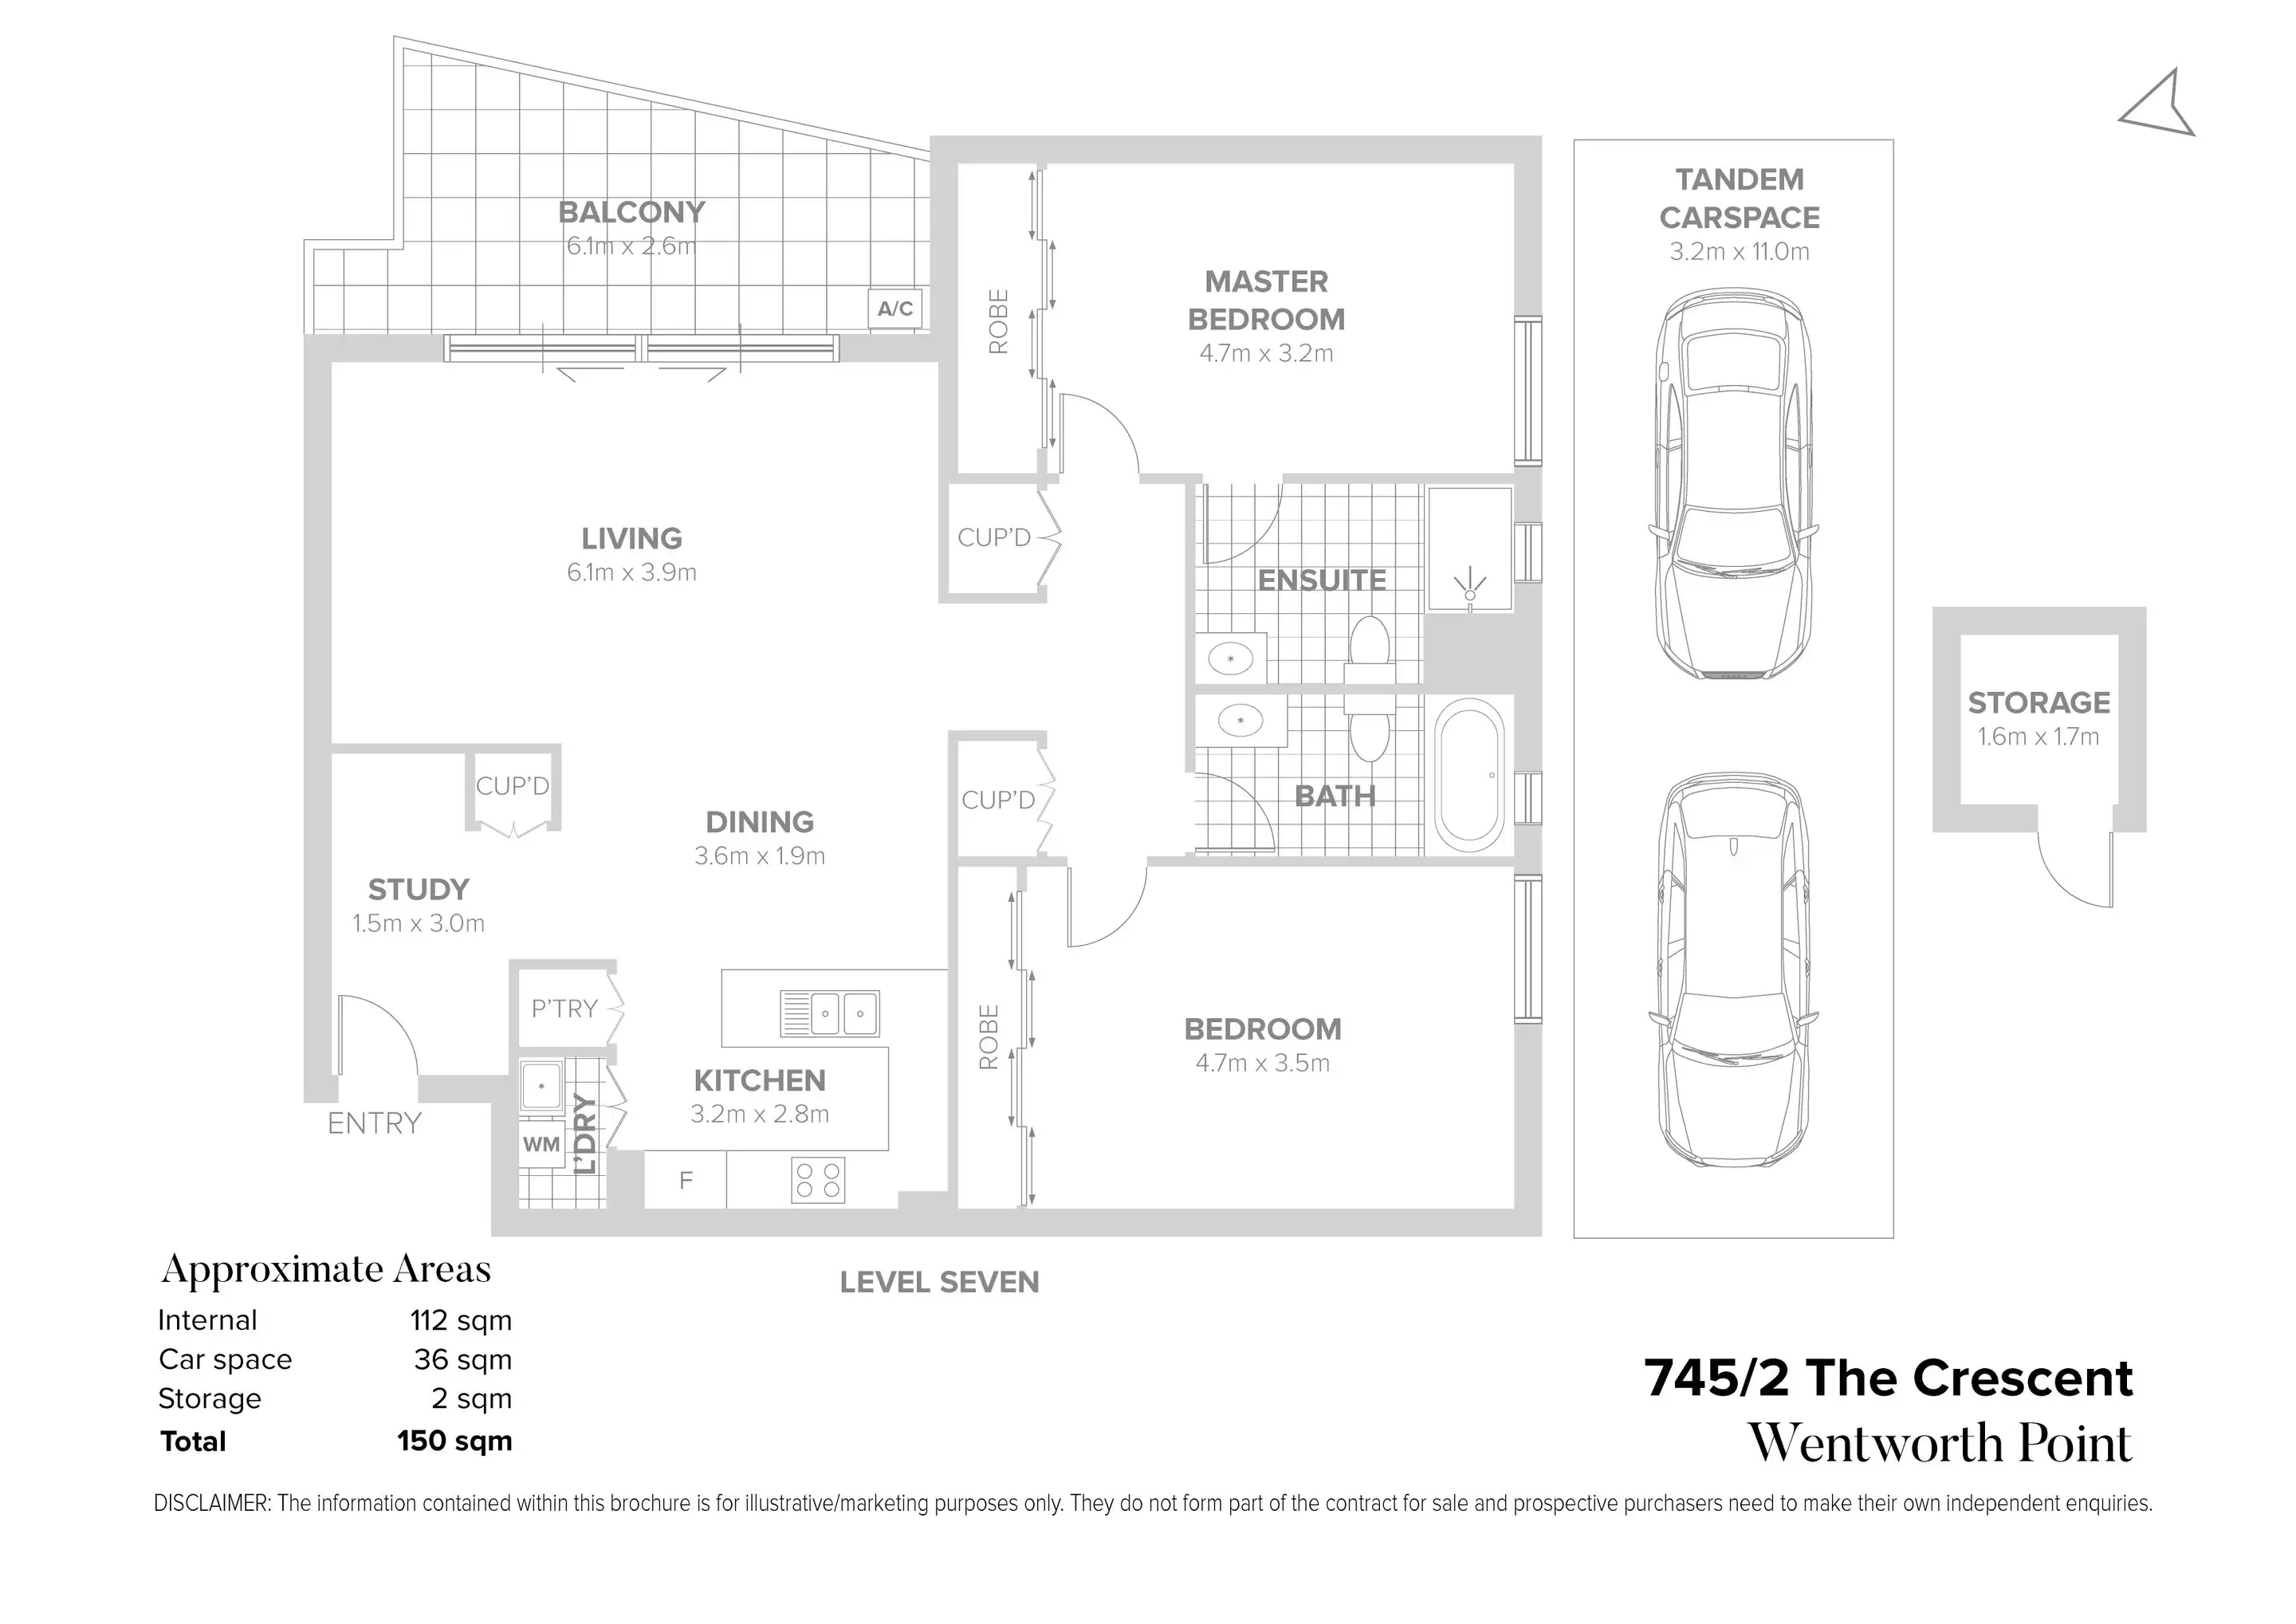 745/2 The Crescent, Wentworth Point Sold by Chidiac Realty - floorplan